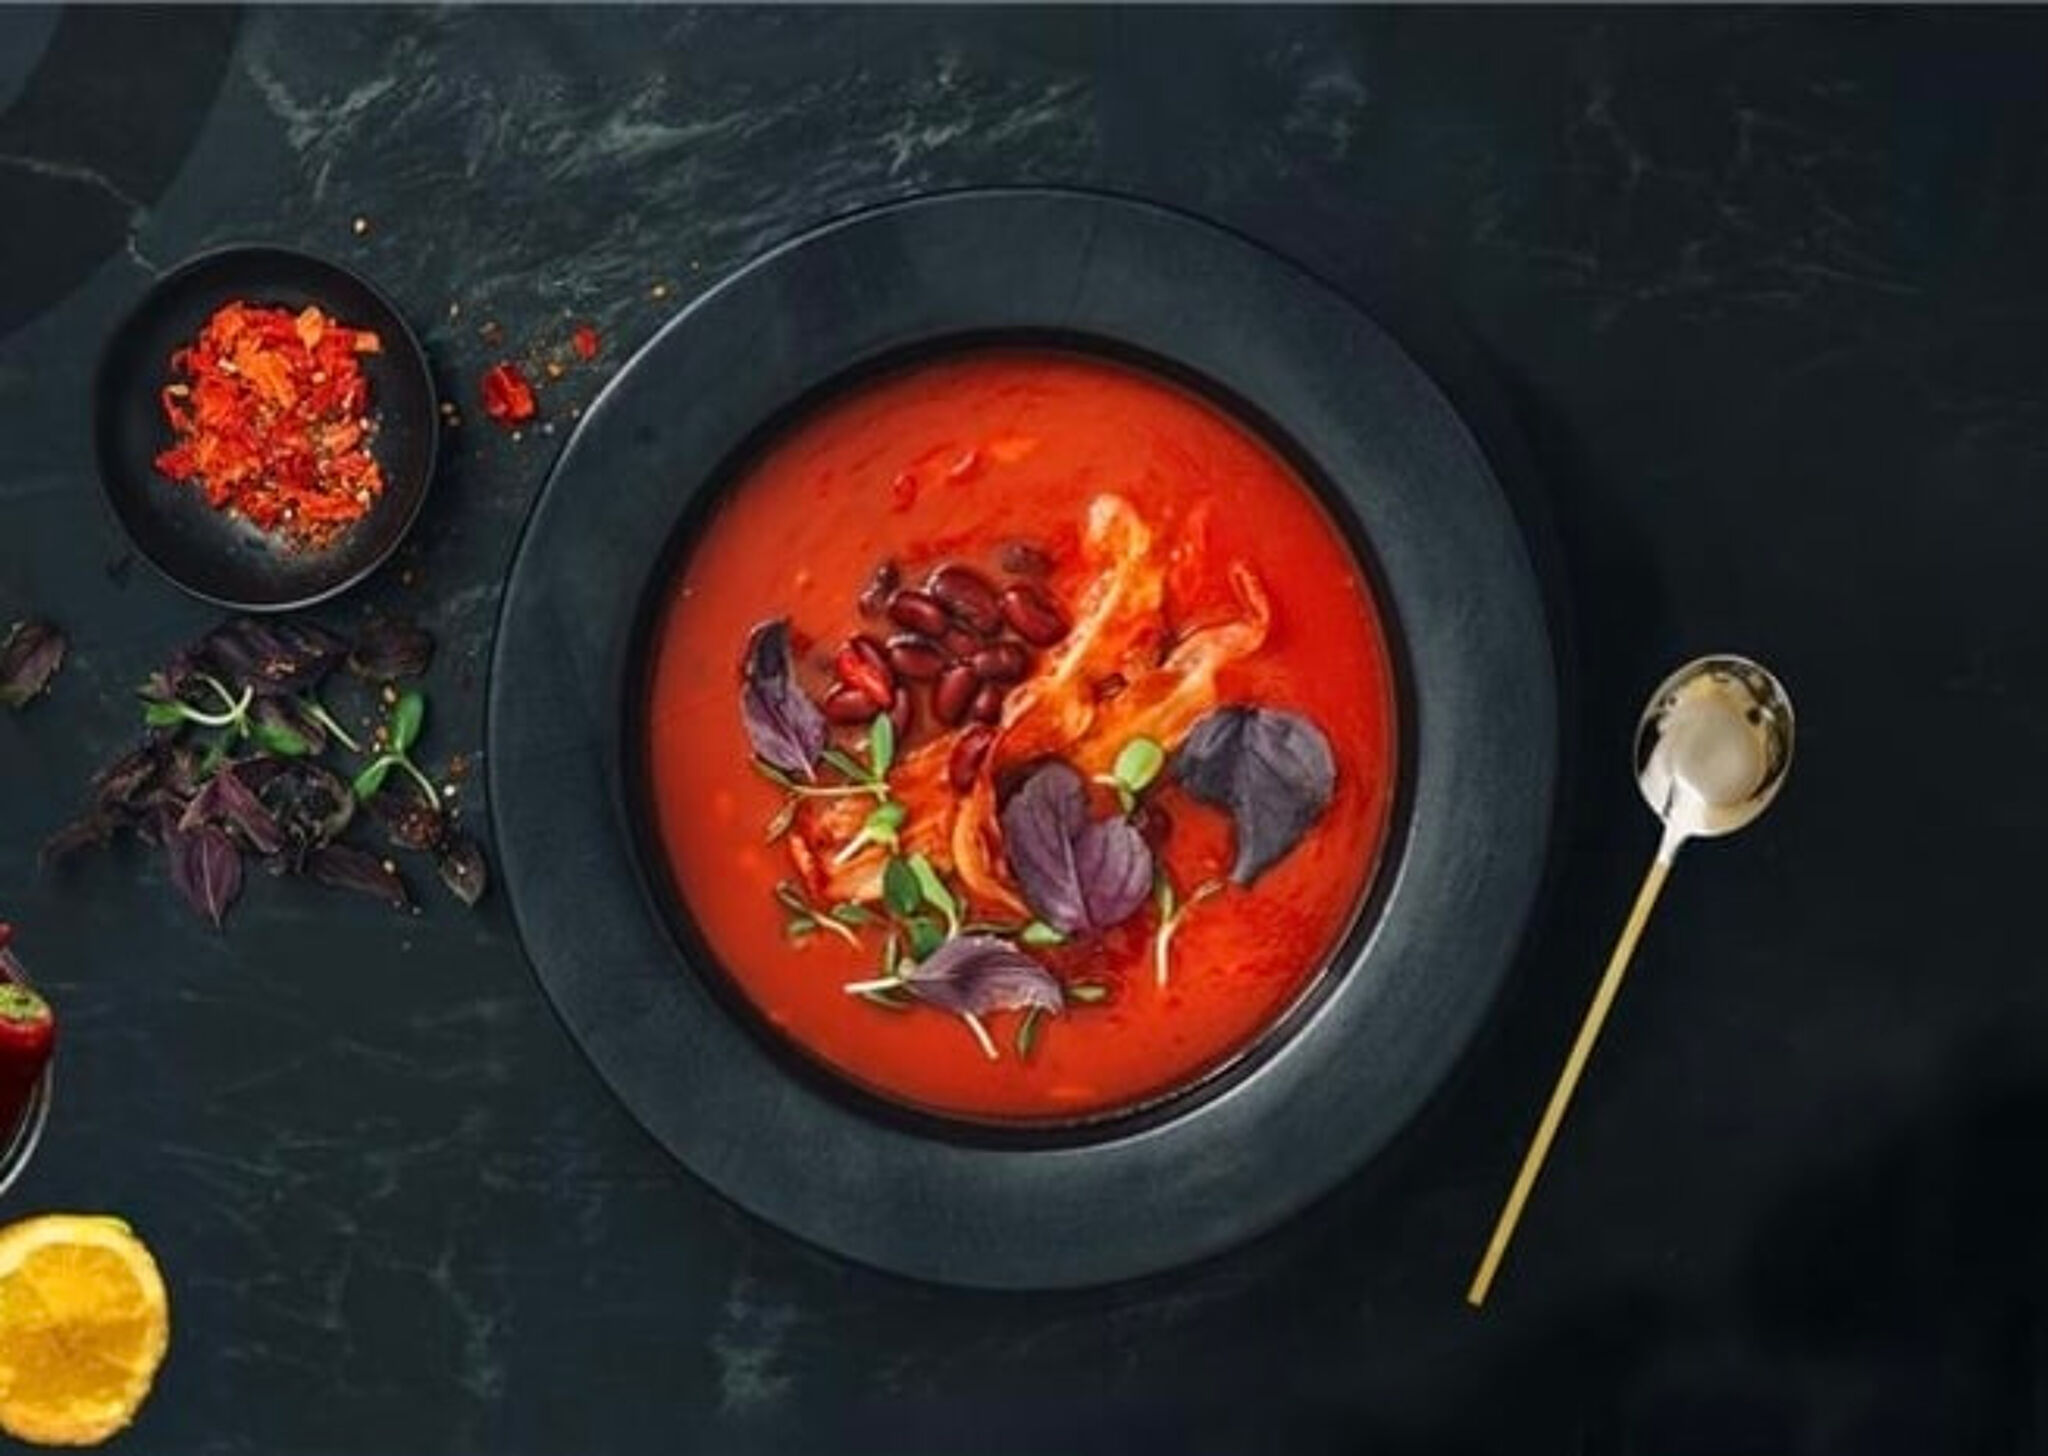 Rich tomato soup garnished with herbs and beans, served in a black bowl on a dark surface.